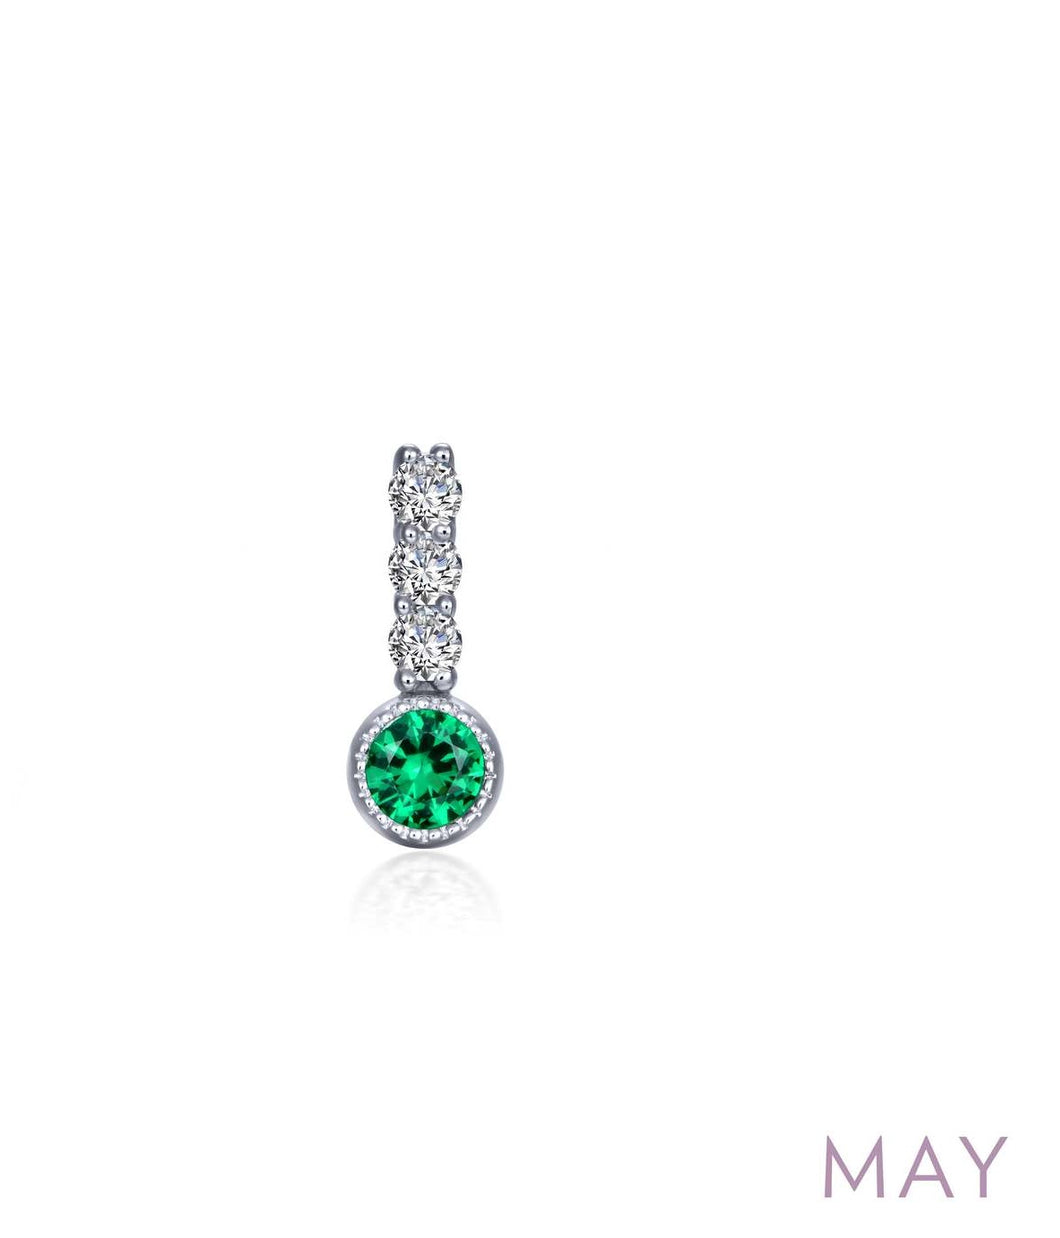 Sterling Silver Rhodium Plated Sticks & Stones Collection 0.17 CTTW Lassaire Stone Simulated Emerald May Love Charm